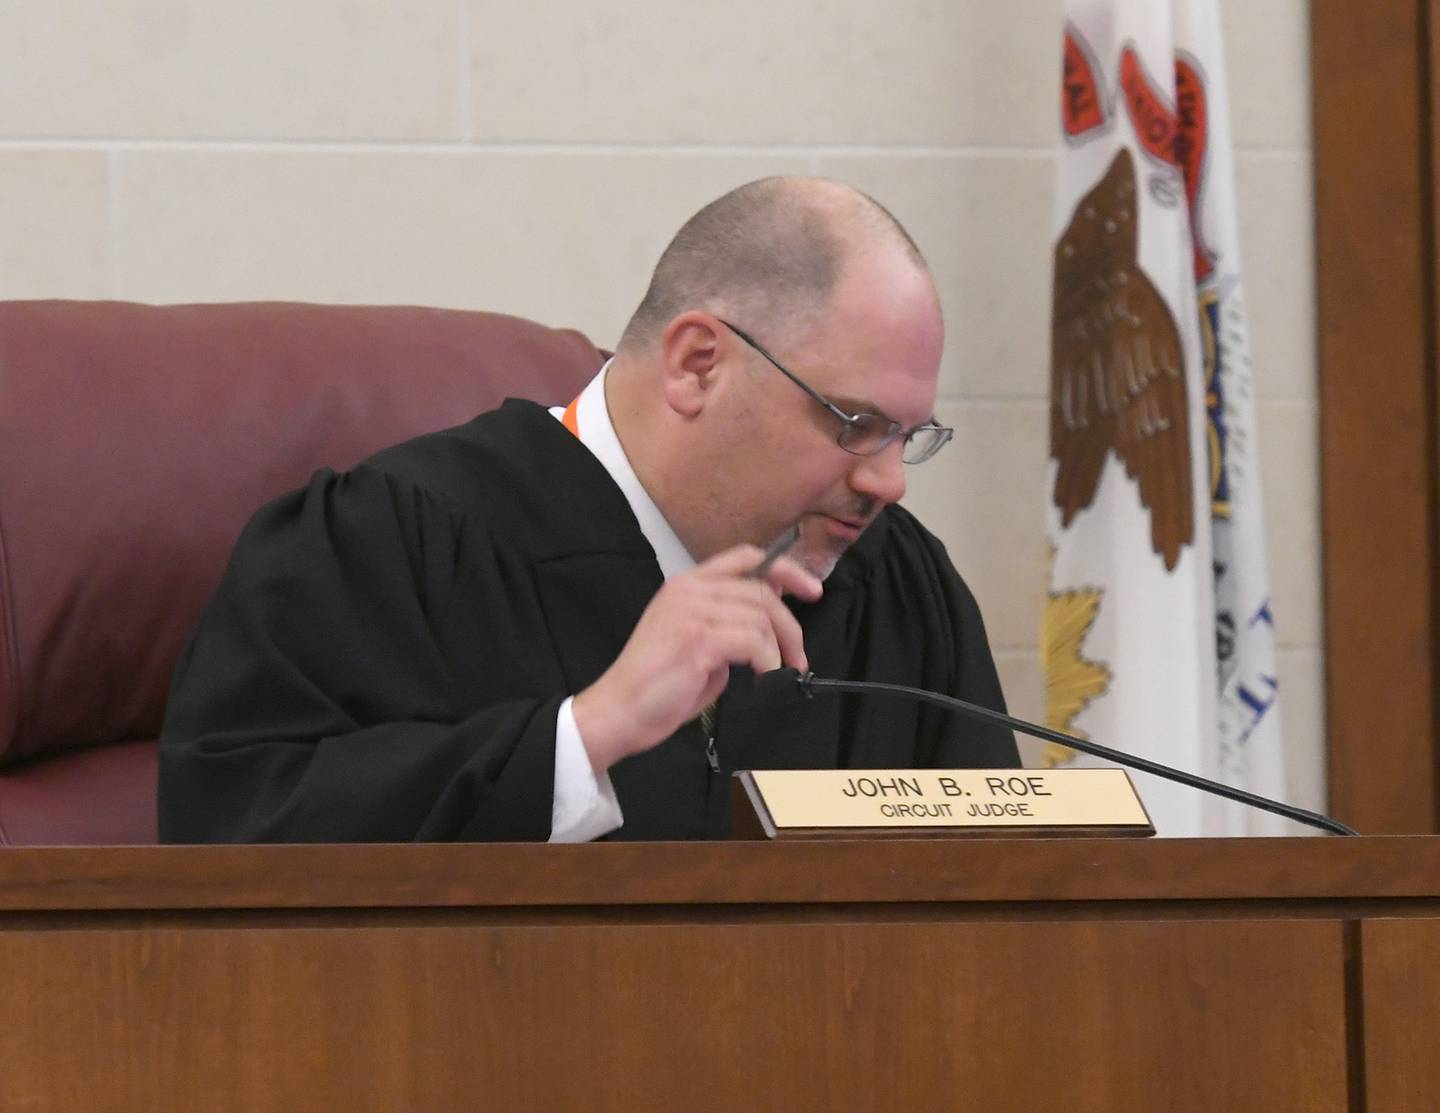 Judge John B. Roe was makes a ruling in the Duane Meyer pretial hearing on Oct. 27.